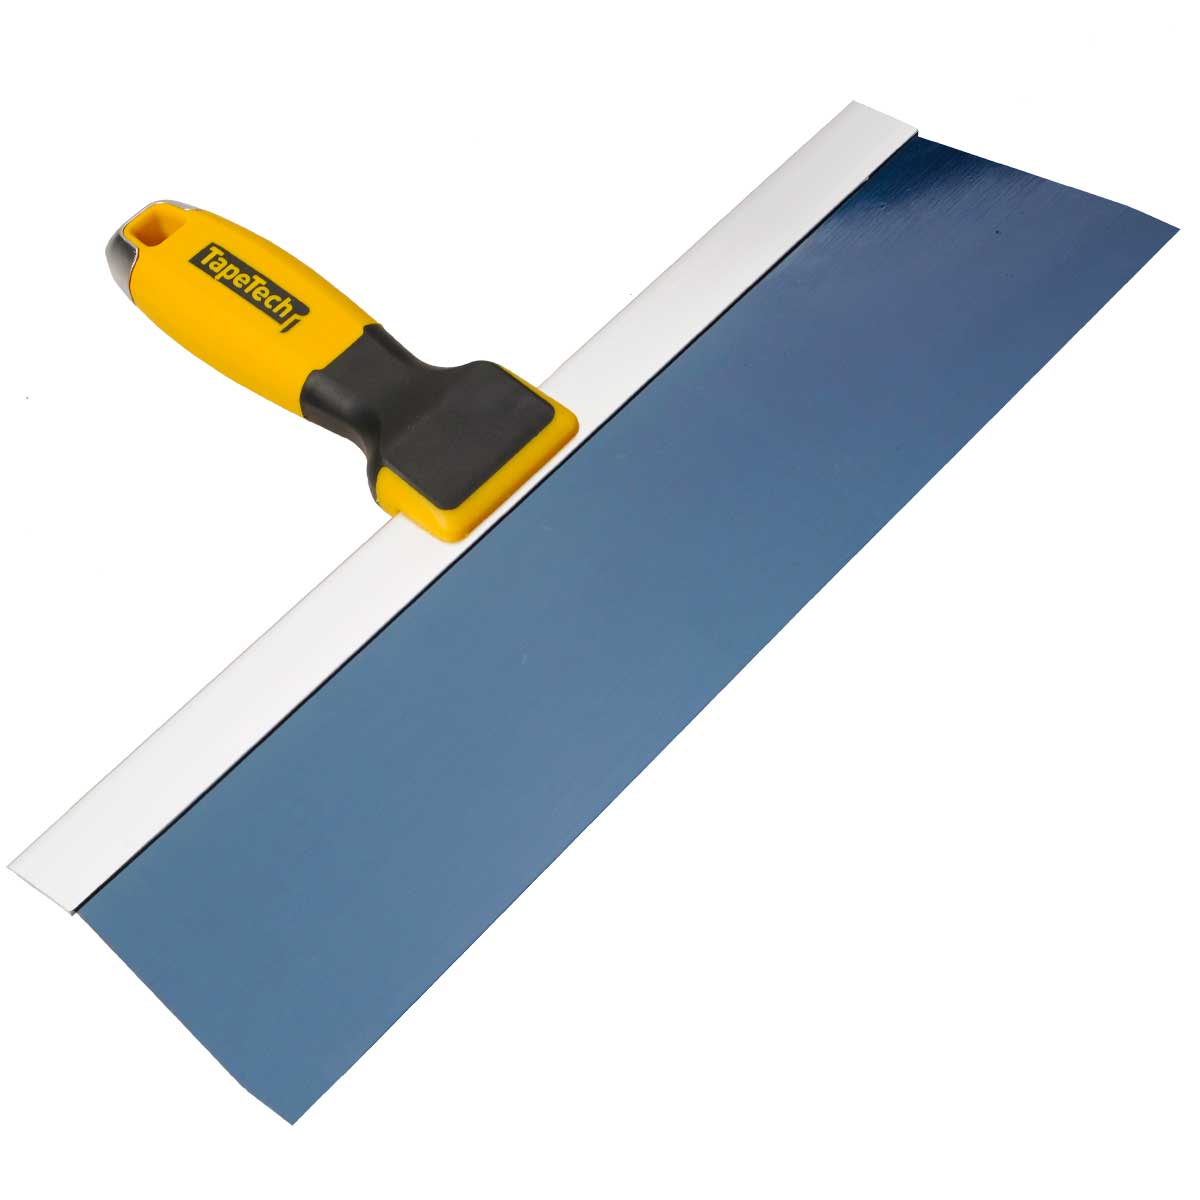 TapeTech 14" BS Taping Knife